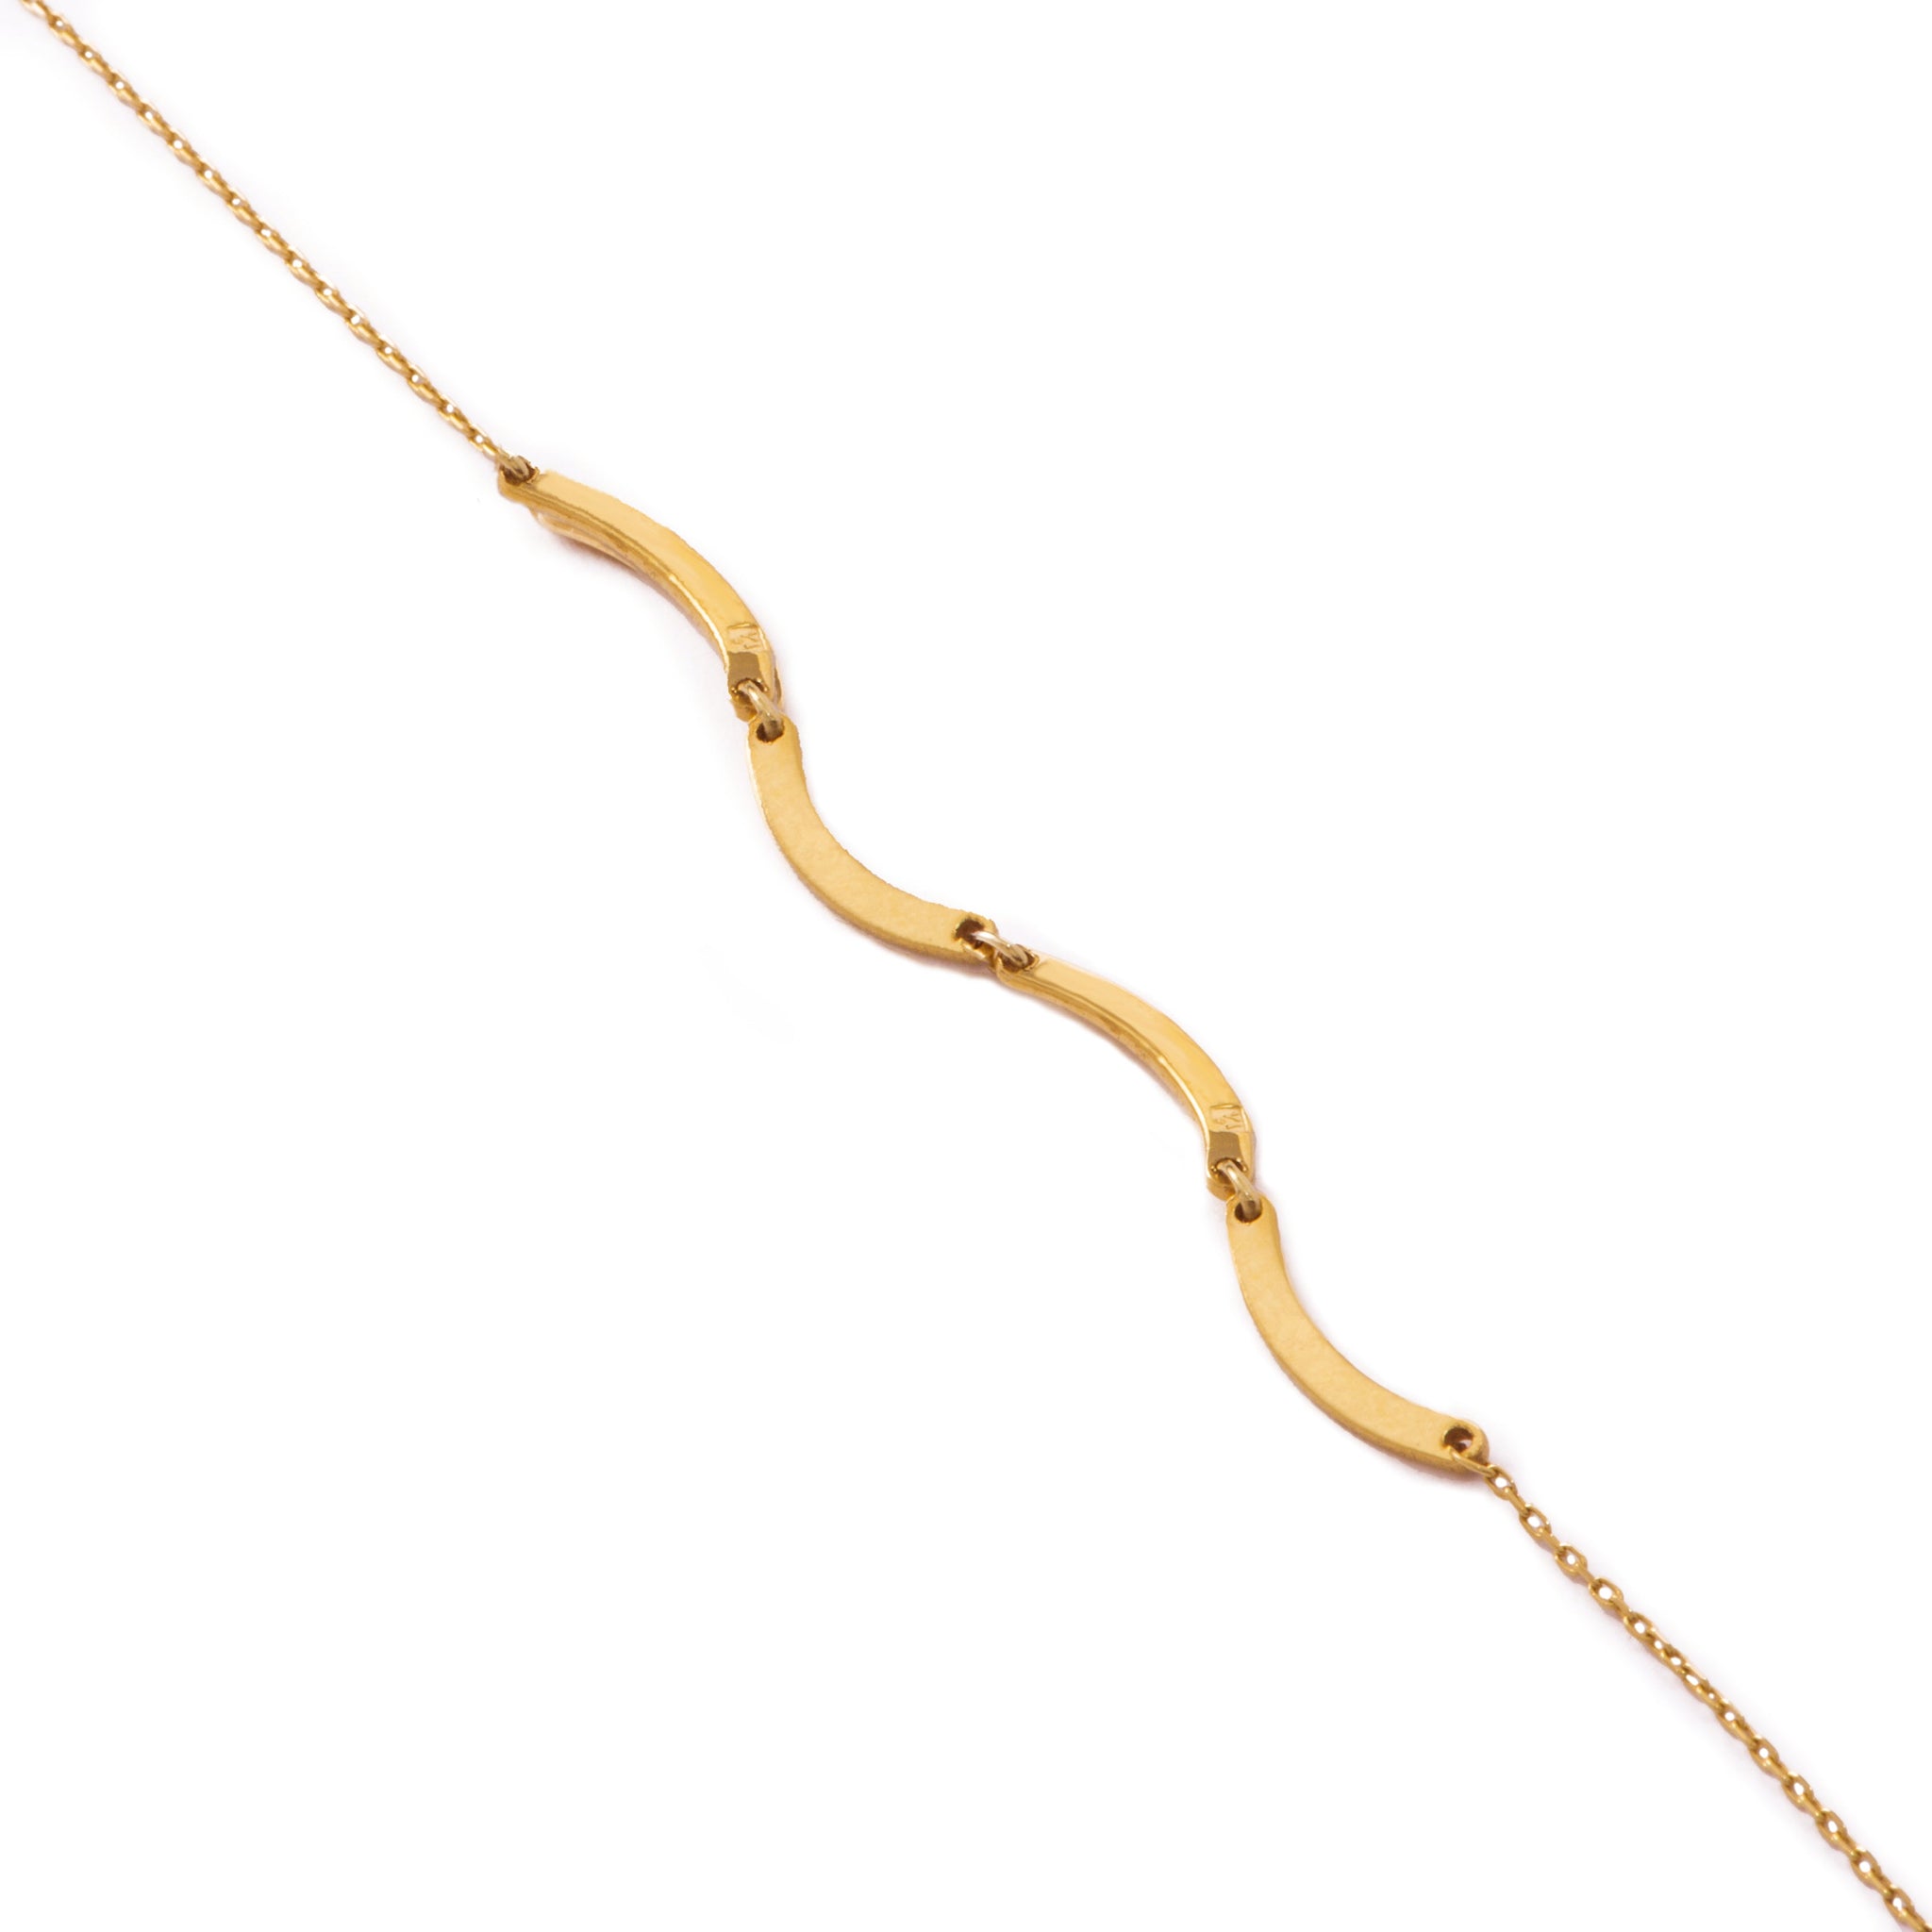 4 Connected Unique Bow Shapped Bars Bracelet in Yellow 18 K Gold - S-BU046G/Y/WG